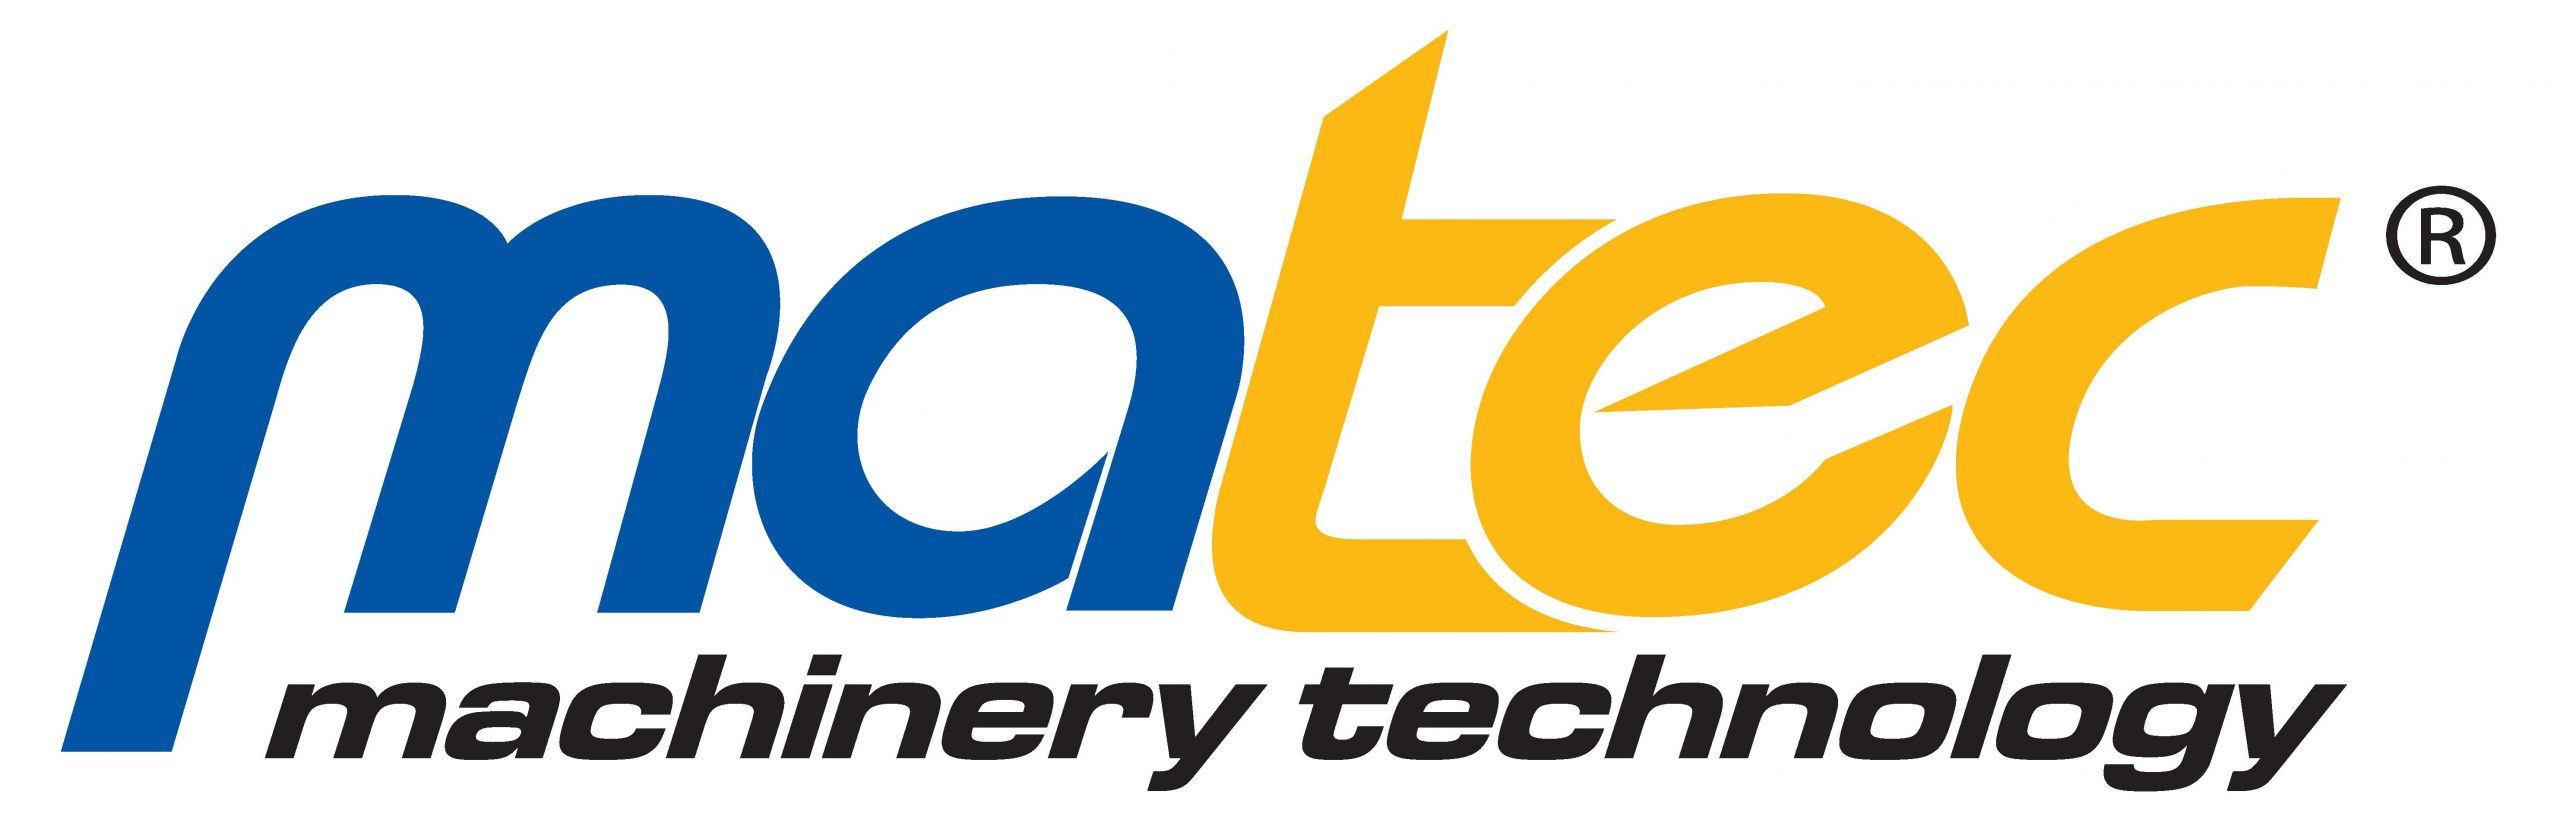 Supplier Matec logo scaled